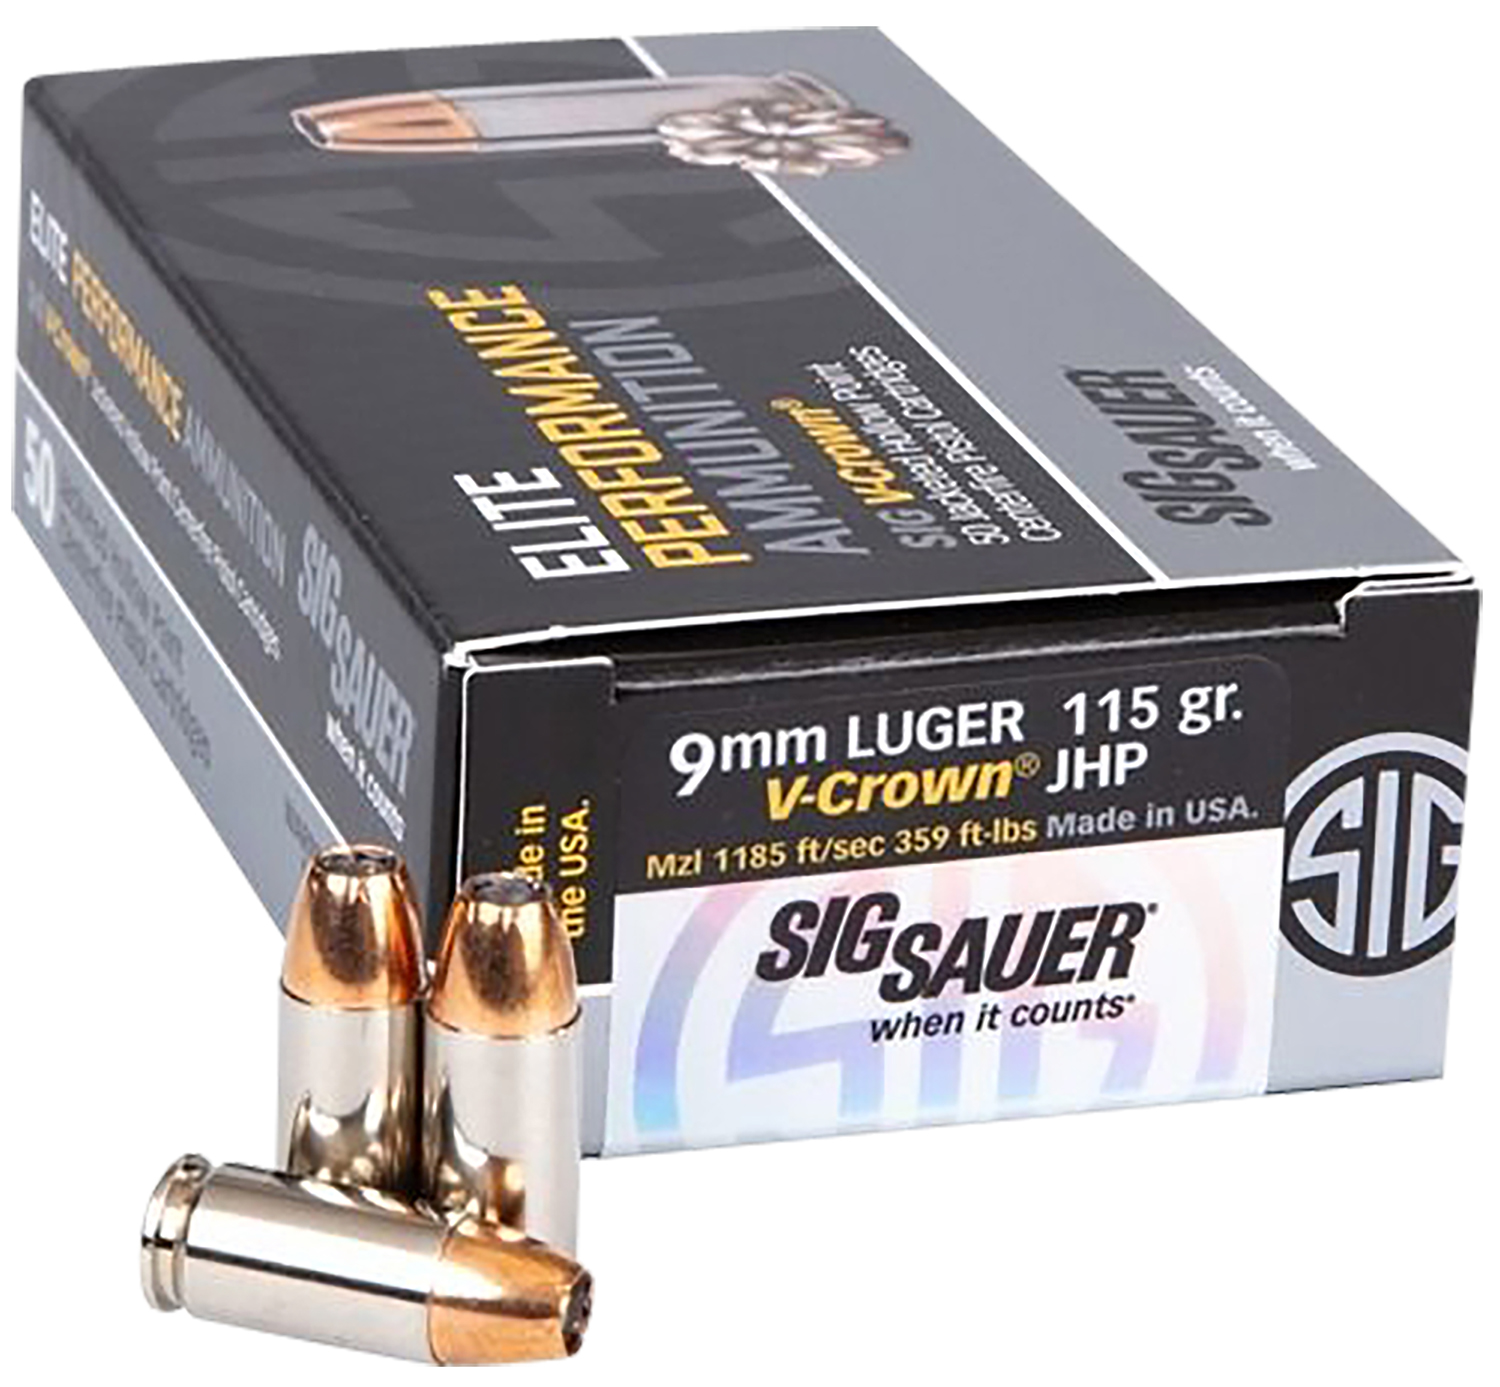 Sig Sauer E9MMA1COMP50 Match Elite Competition  9mm Luger 115 gr 1185 fps V-Crown Jacketed Hollow Point (VJHP) 50 Bx/10 Cs